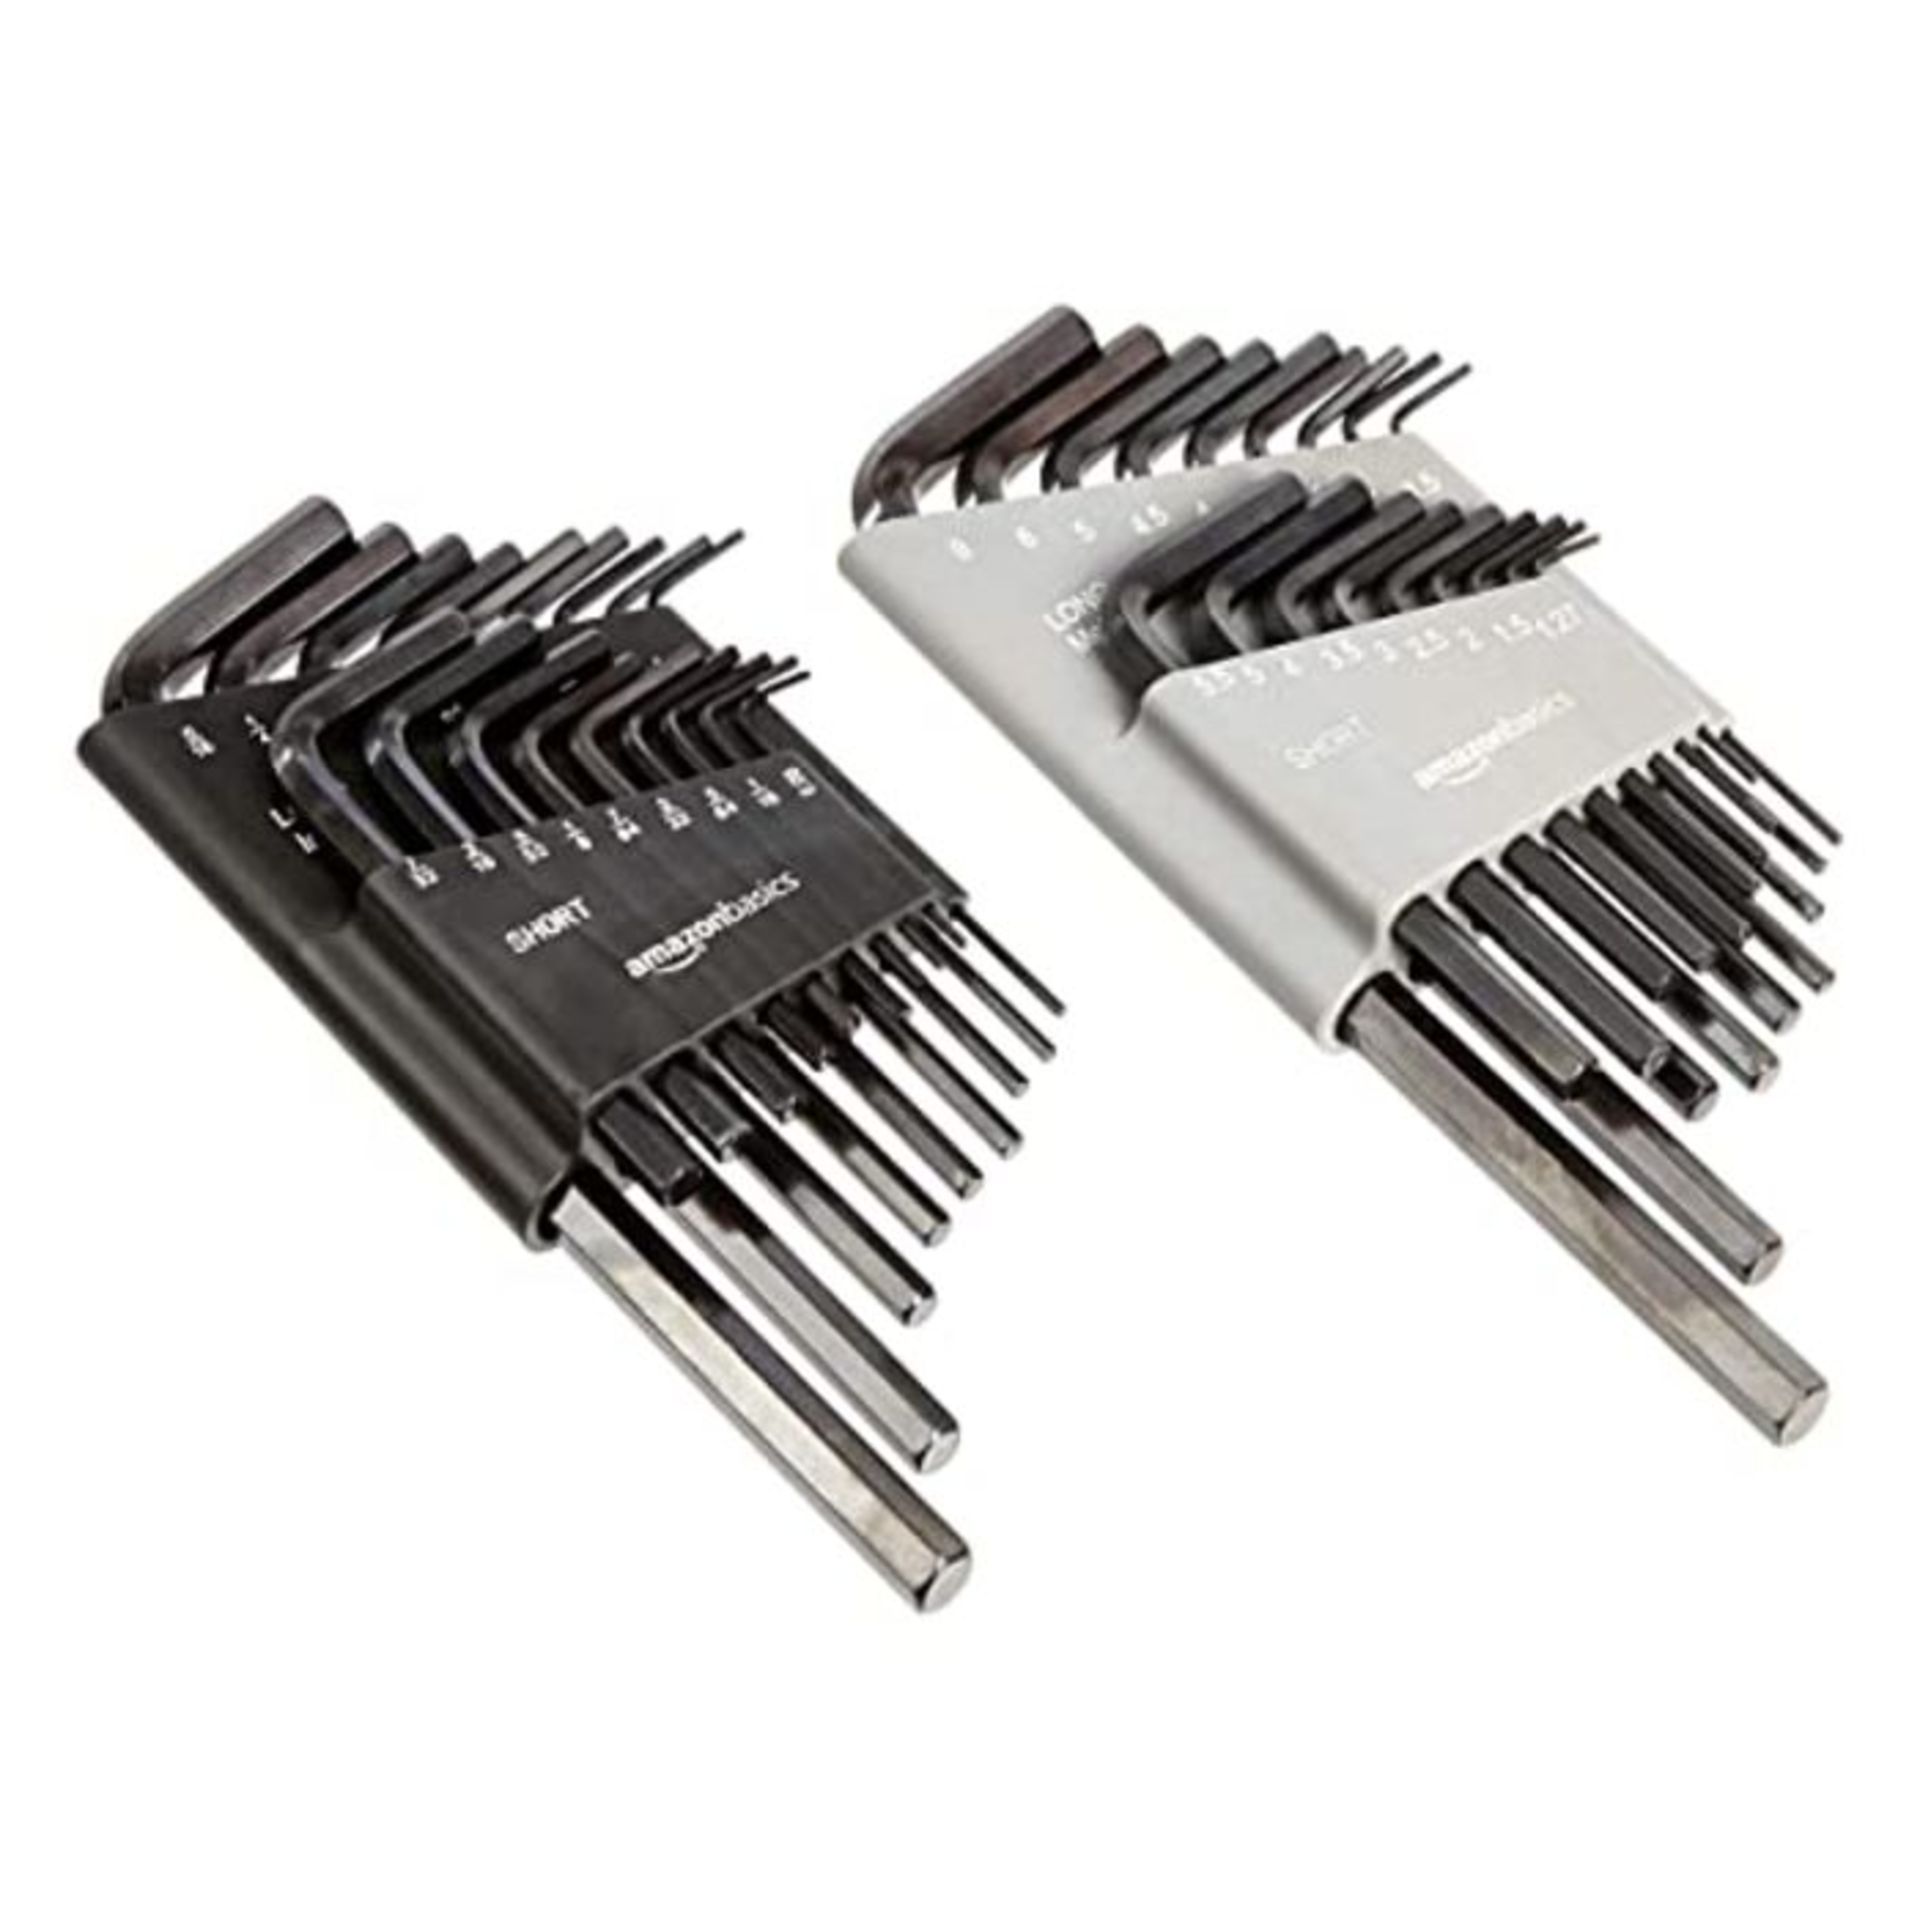 Amazon Basics 36-Piece Allen Wrench/Hex Key Set - Inch/SAE and Metric